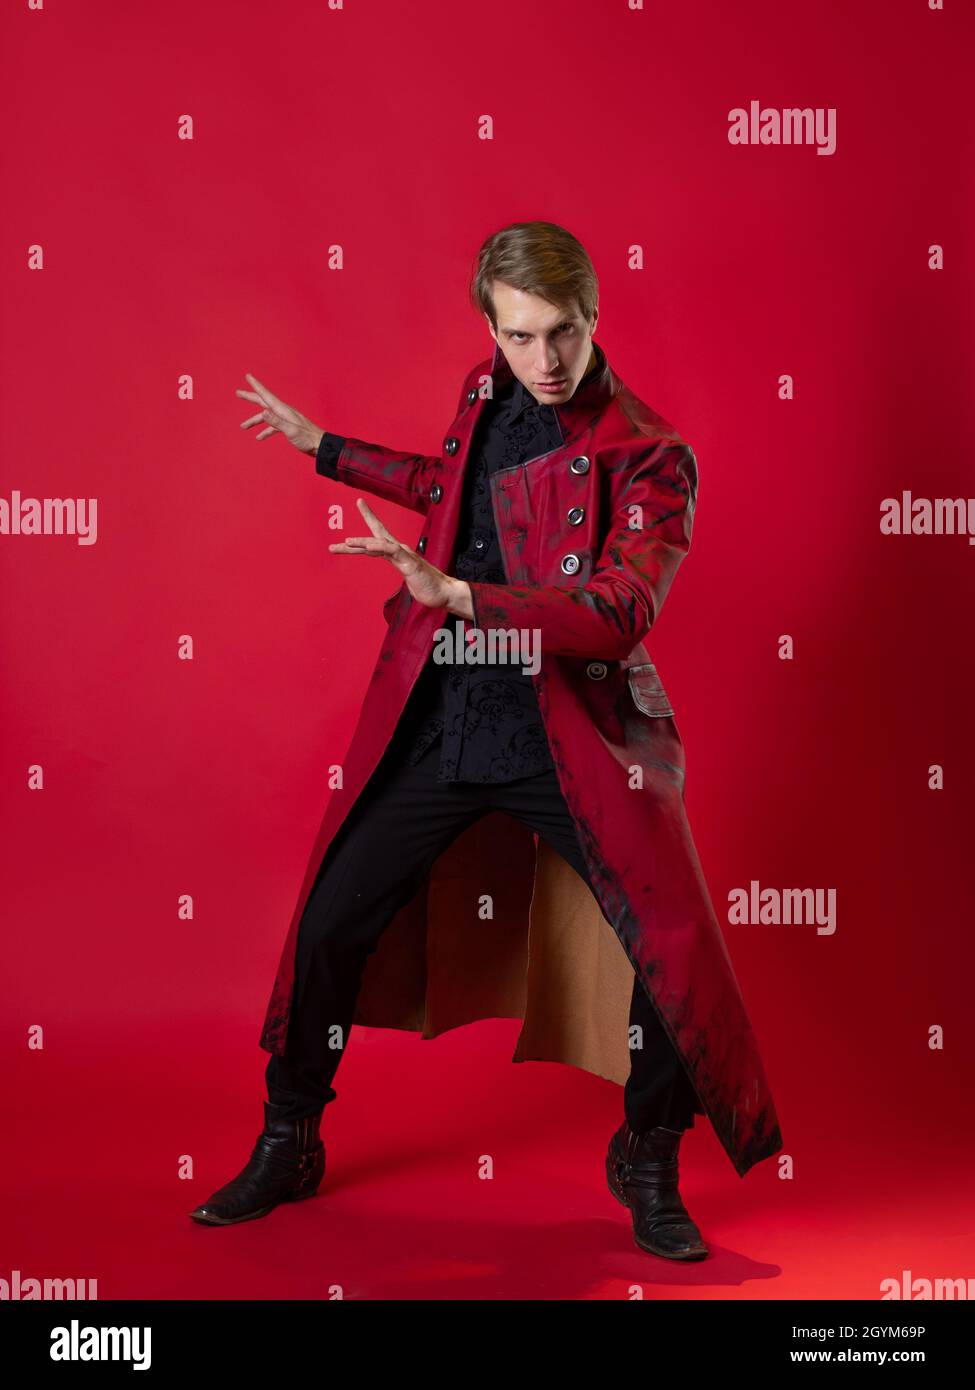 An outrageous young man in a daring red coat in a vintage noir style, epic poses and makes a hand gesture. photo on a red background Stock Photo